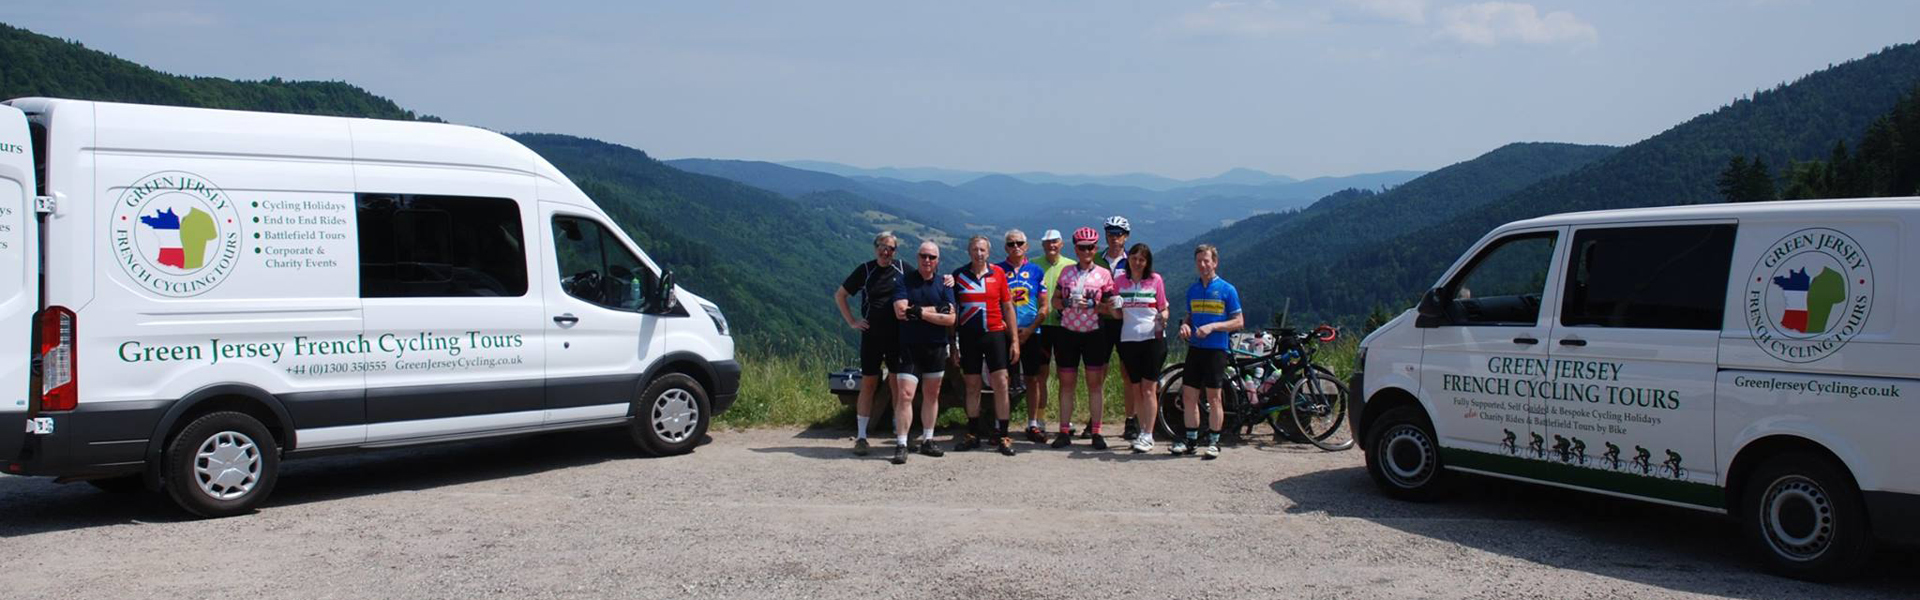 Travel Information | Green Jersey French Cycling Tours